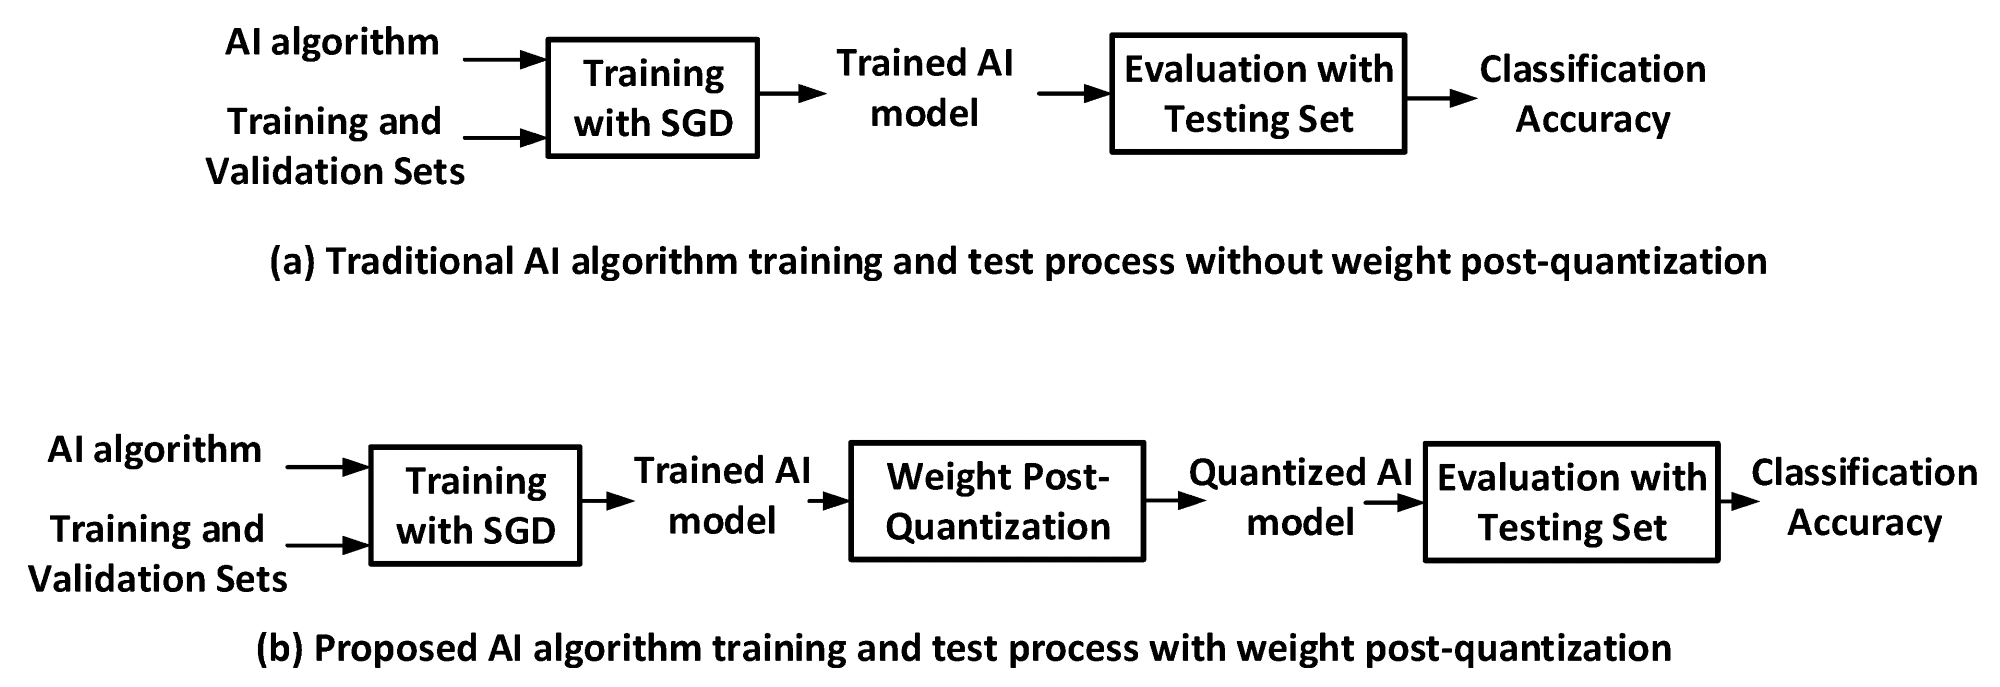 (a) Traditional AI training and evaluation process without weight quantization, and (b) proposed AI training and evaluation process with post-training weight quantization.